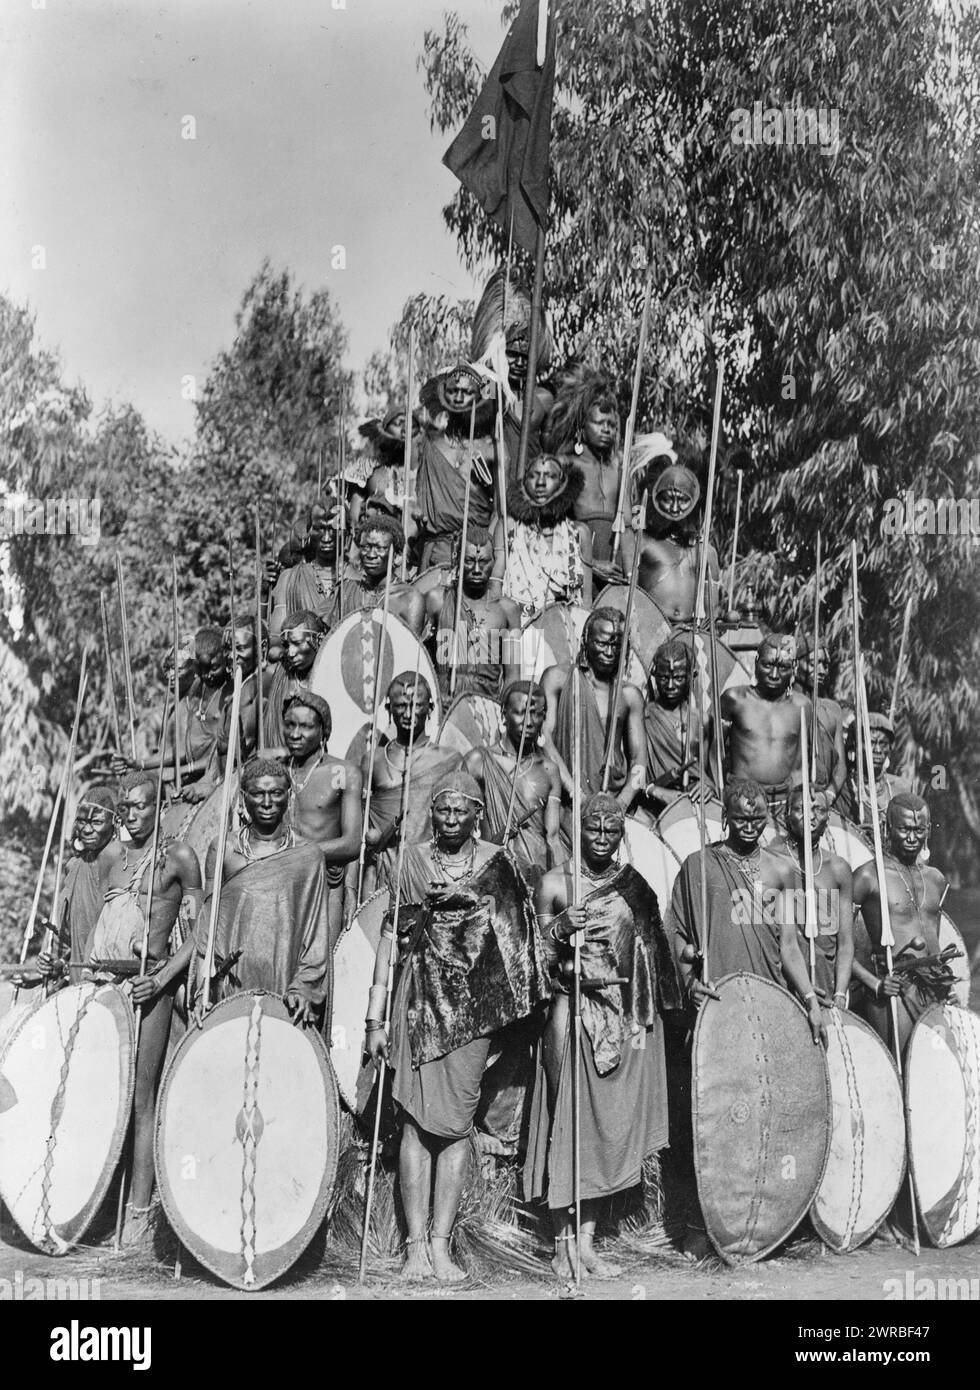 Group of Kavirondo natives posed in standing pyramid with spears and shields. ca. 191-, in Africa, Carpenter, Frank G. (Frank George), 1855-1924, collector, between 1910 and 1920, Warriors, Africa, 1910-1920, Group portraits, 1910-1920., Portrait photographs, 1910-1920, Group portraits, 1910-1920, 1 photographic print Stock Photo